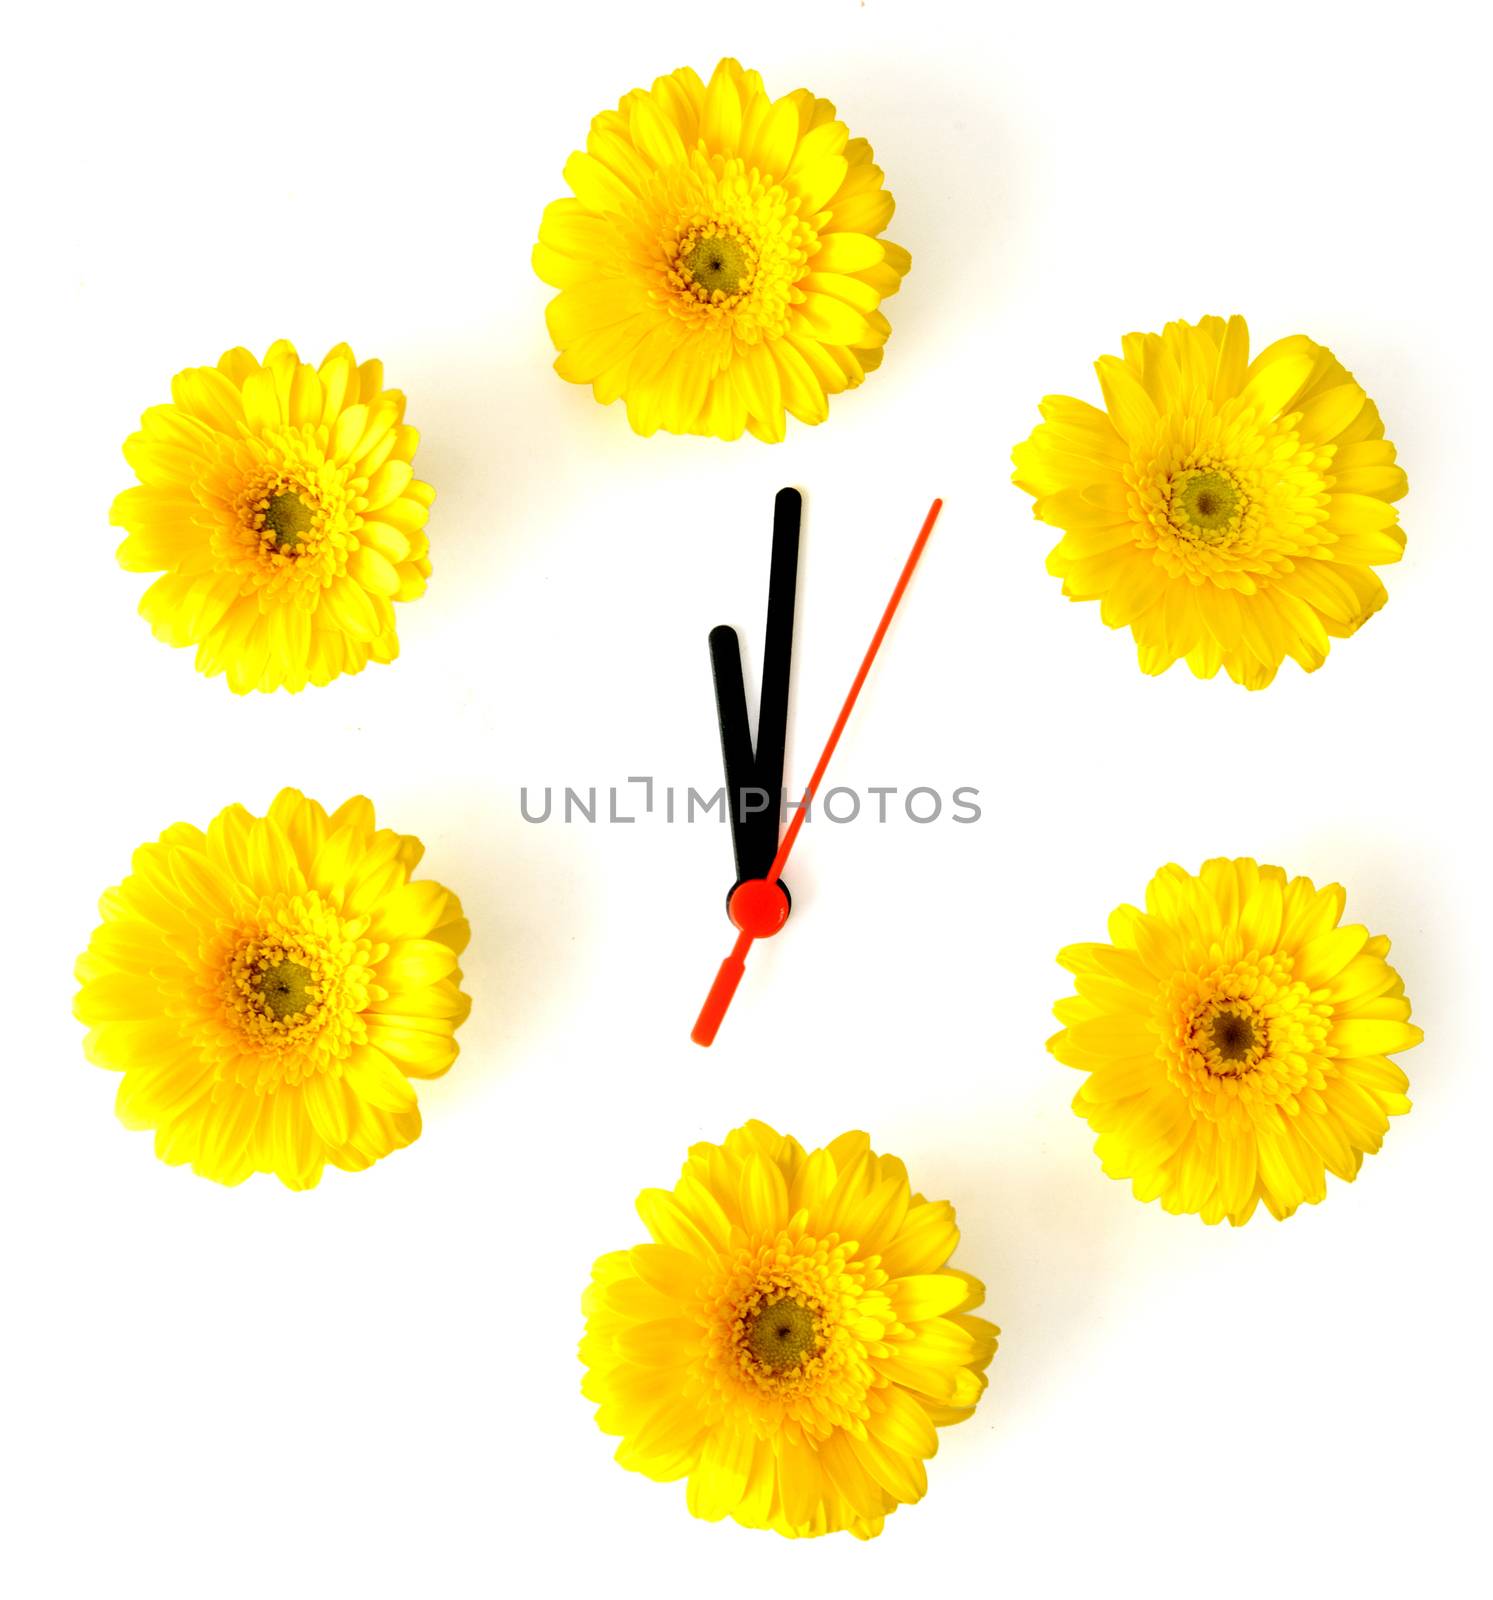 Clock face made from yellow spring daisies 